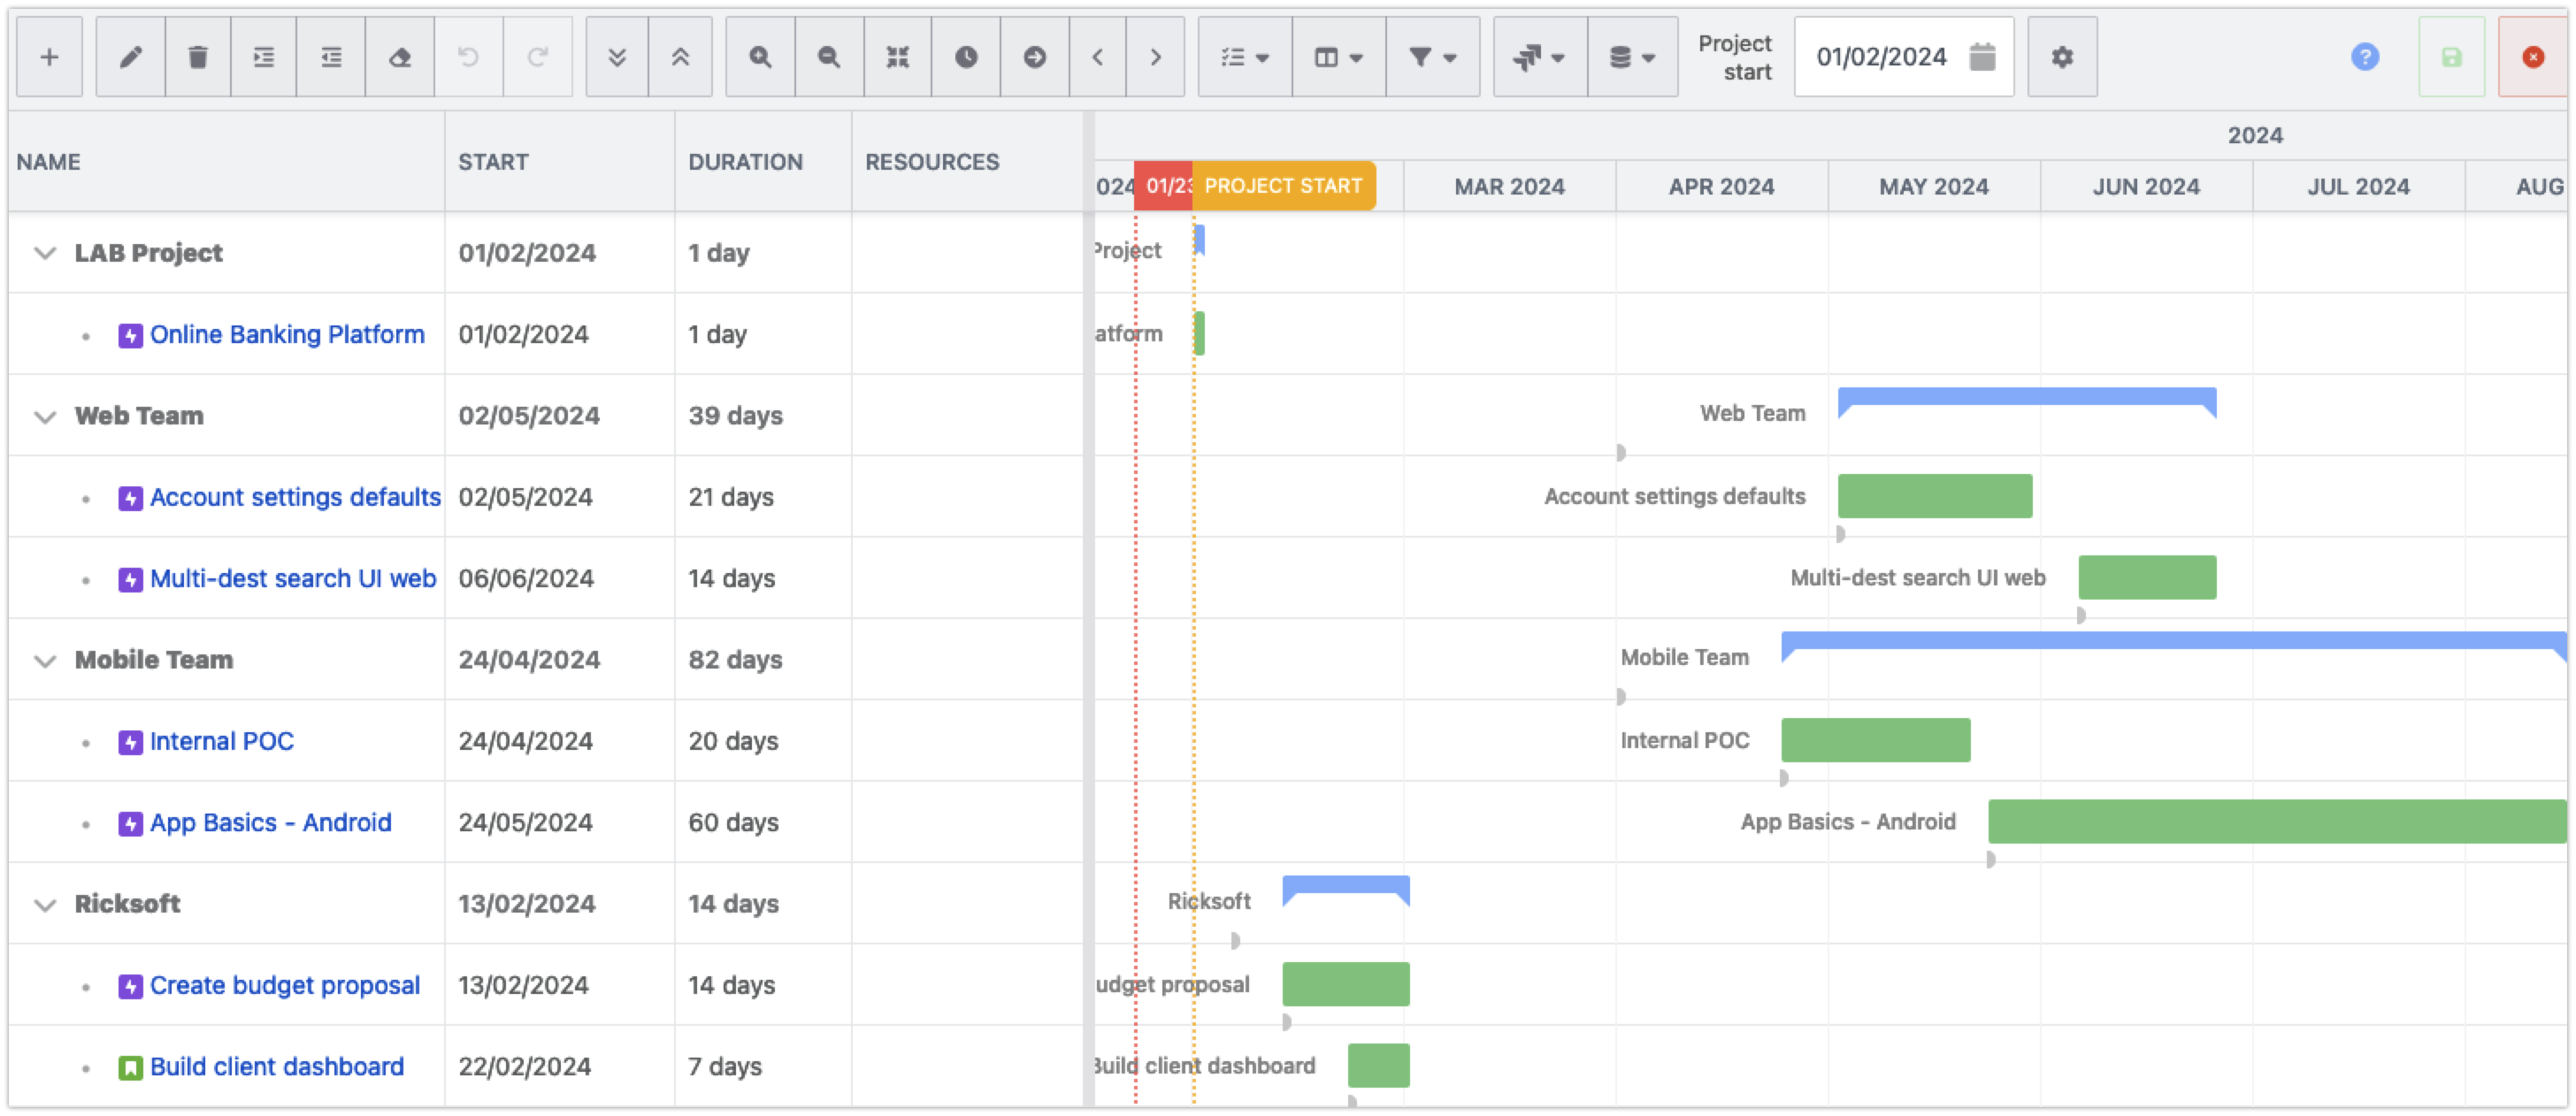 View and track all the Jira Epics across multiple projects on Gantt chart.